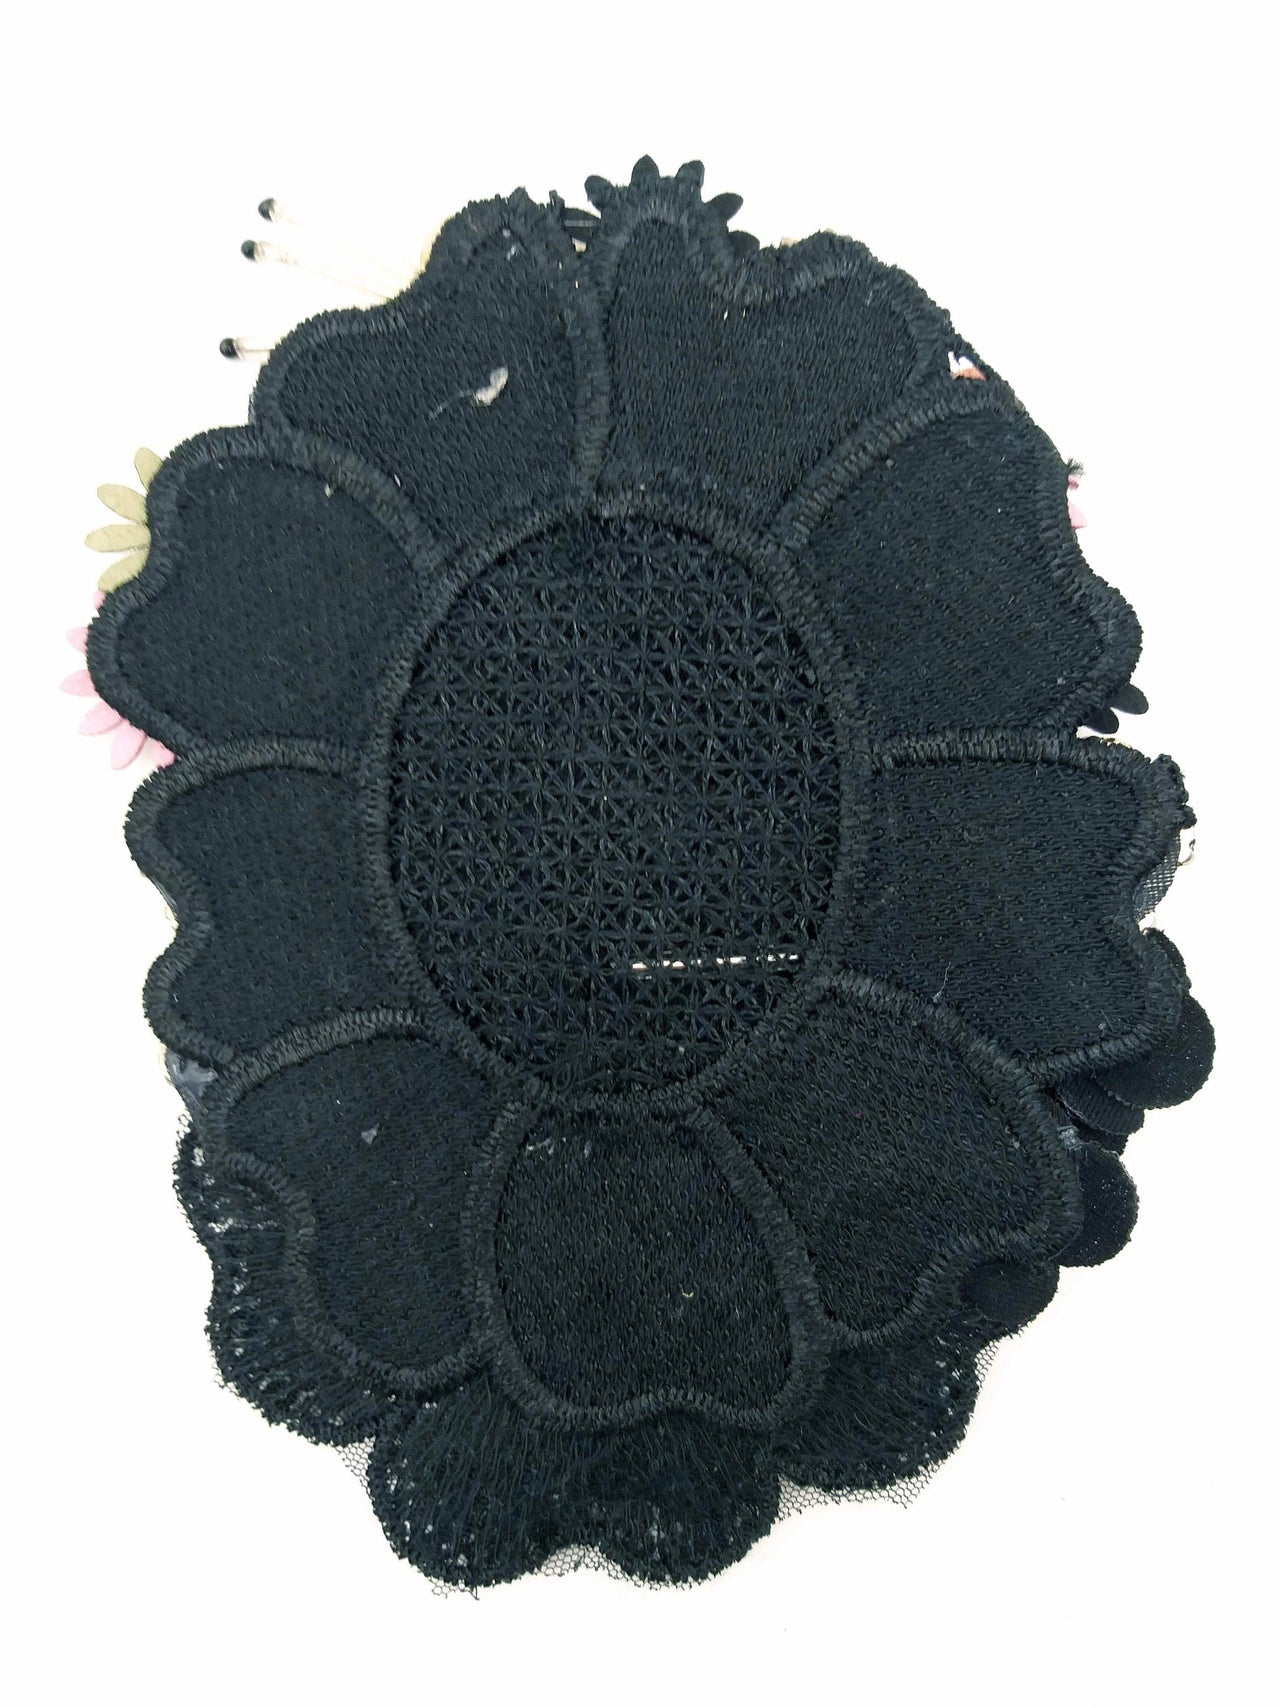 Black Hand Embroidered Floral Applique With Beads, Rhinestones,Bugle Beads